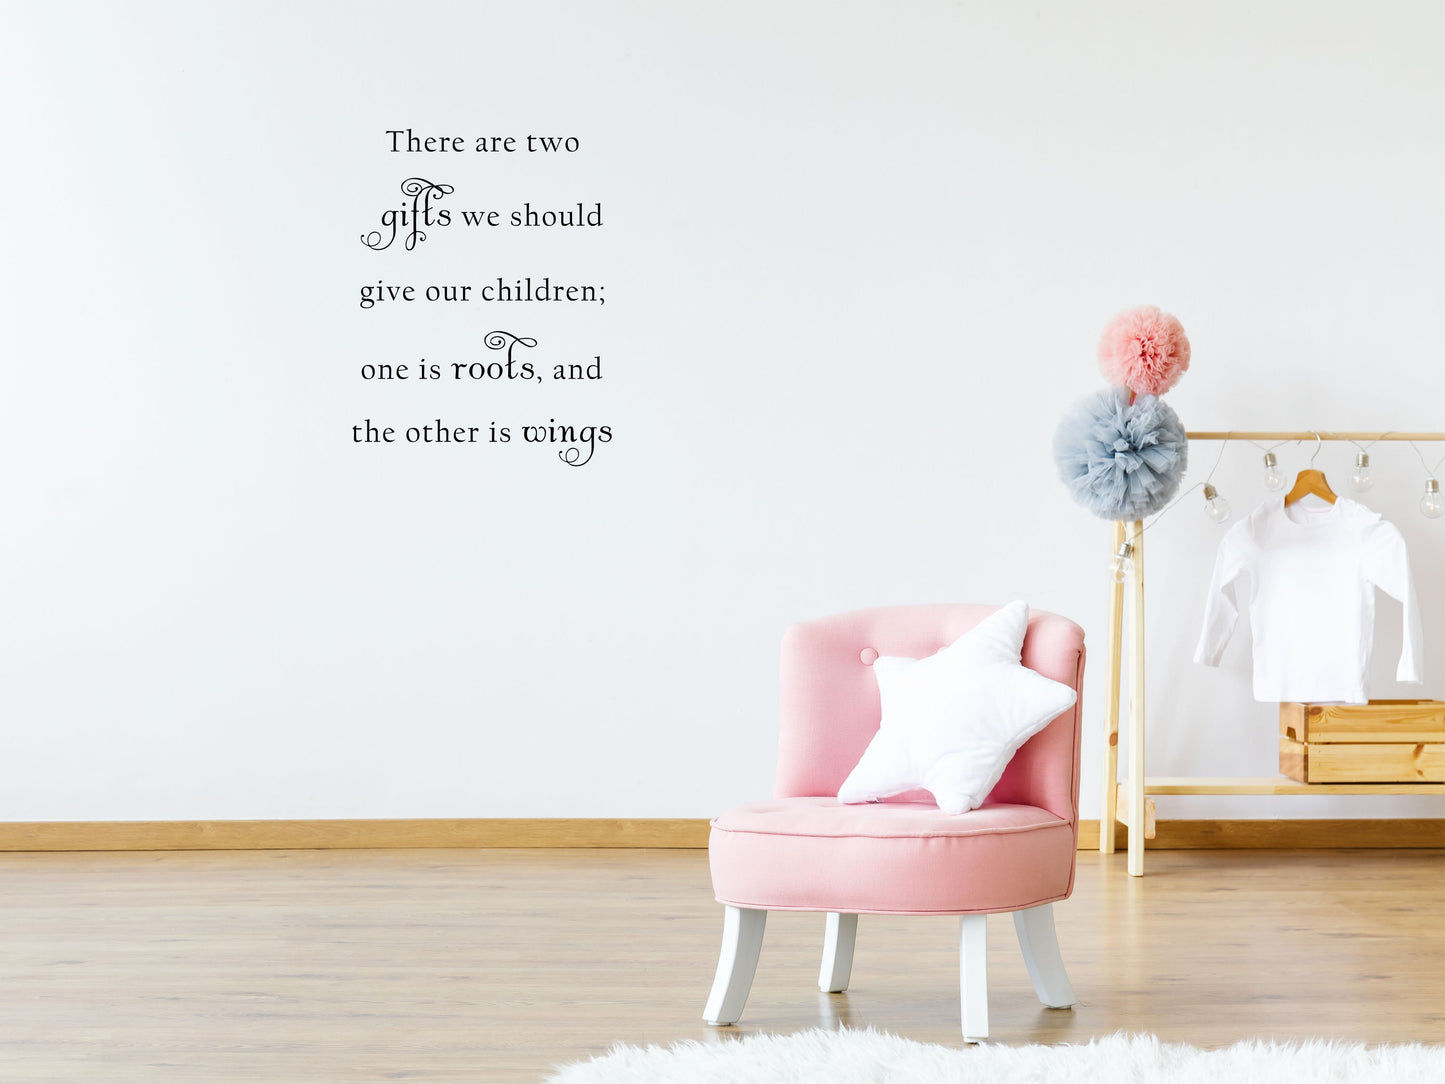 There Are Two Gifts We Should Give Our Children - Inspirational Wall Signs Vinyl Wall Decal Inspirational Wall Signs 